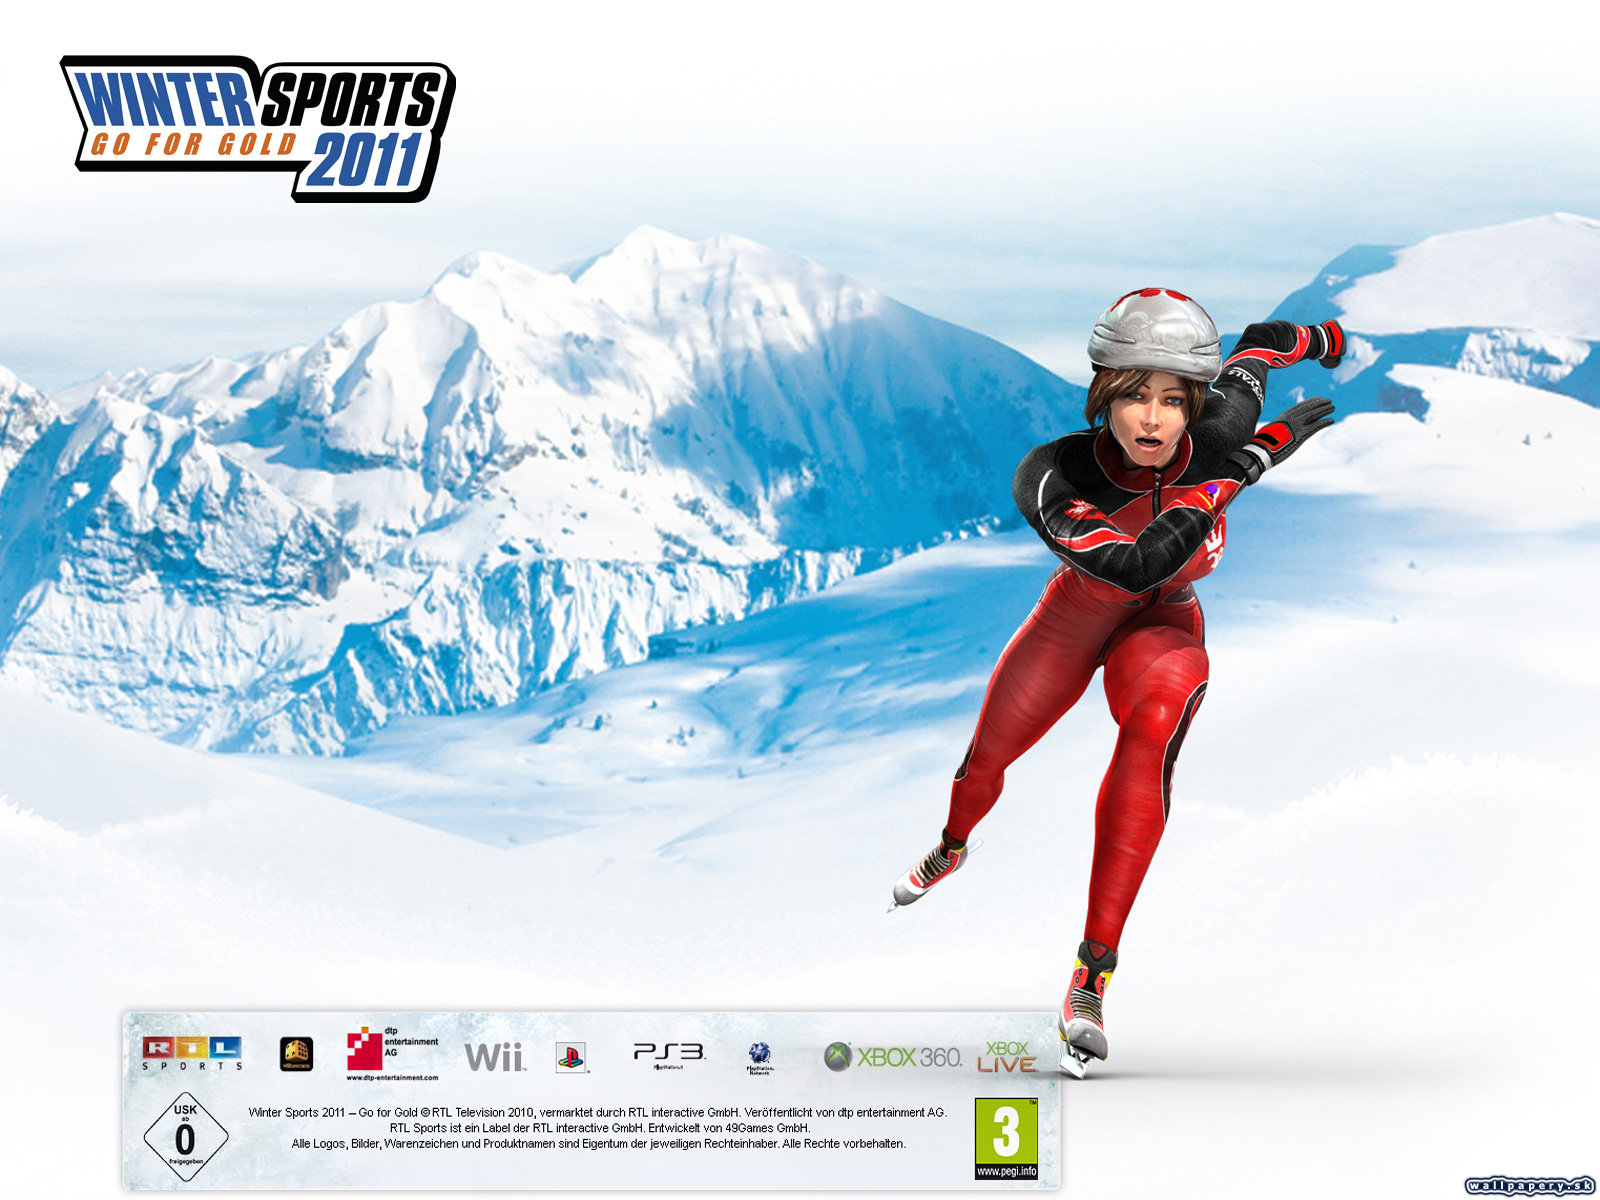 Winter Sports 2011: Go for Gold - wallpaper 2